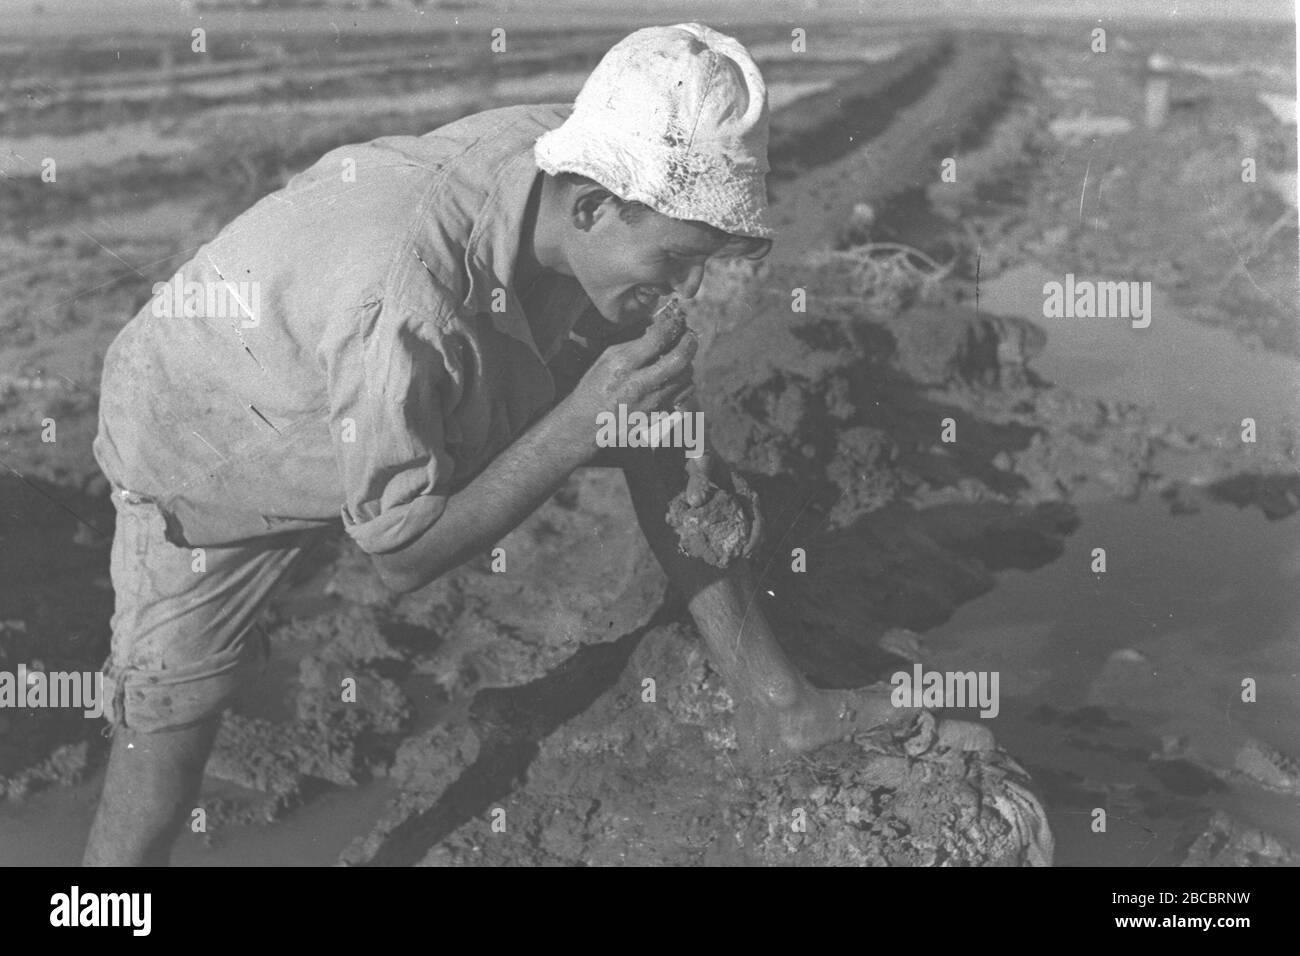 English A Member Of Kibbutz Beit Haarava Tasting The Soil In One Of The Fields Under Reclamation For Agricultural Use O U I O E Ss O E I E O I E I O I U E I E I U I U O I I I E I